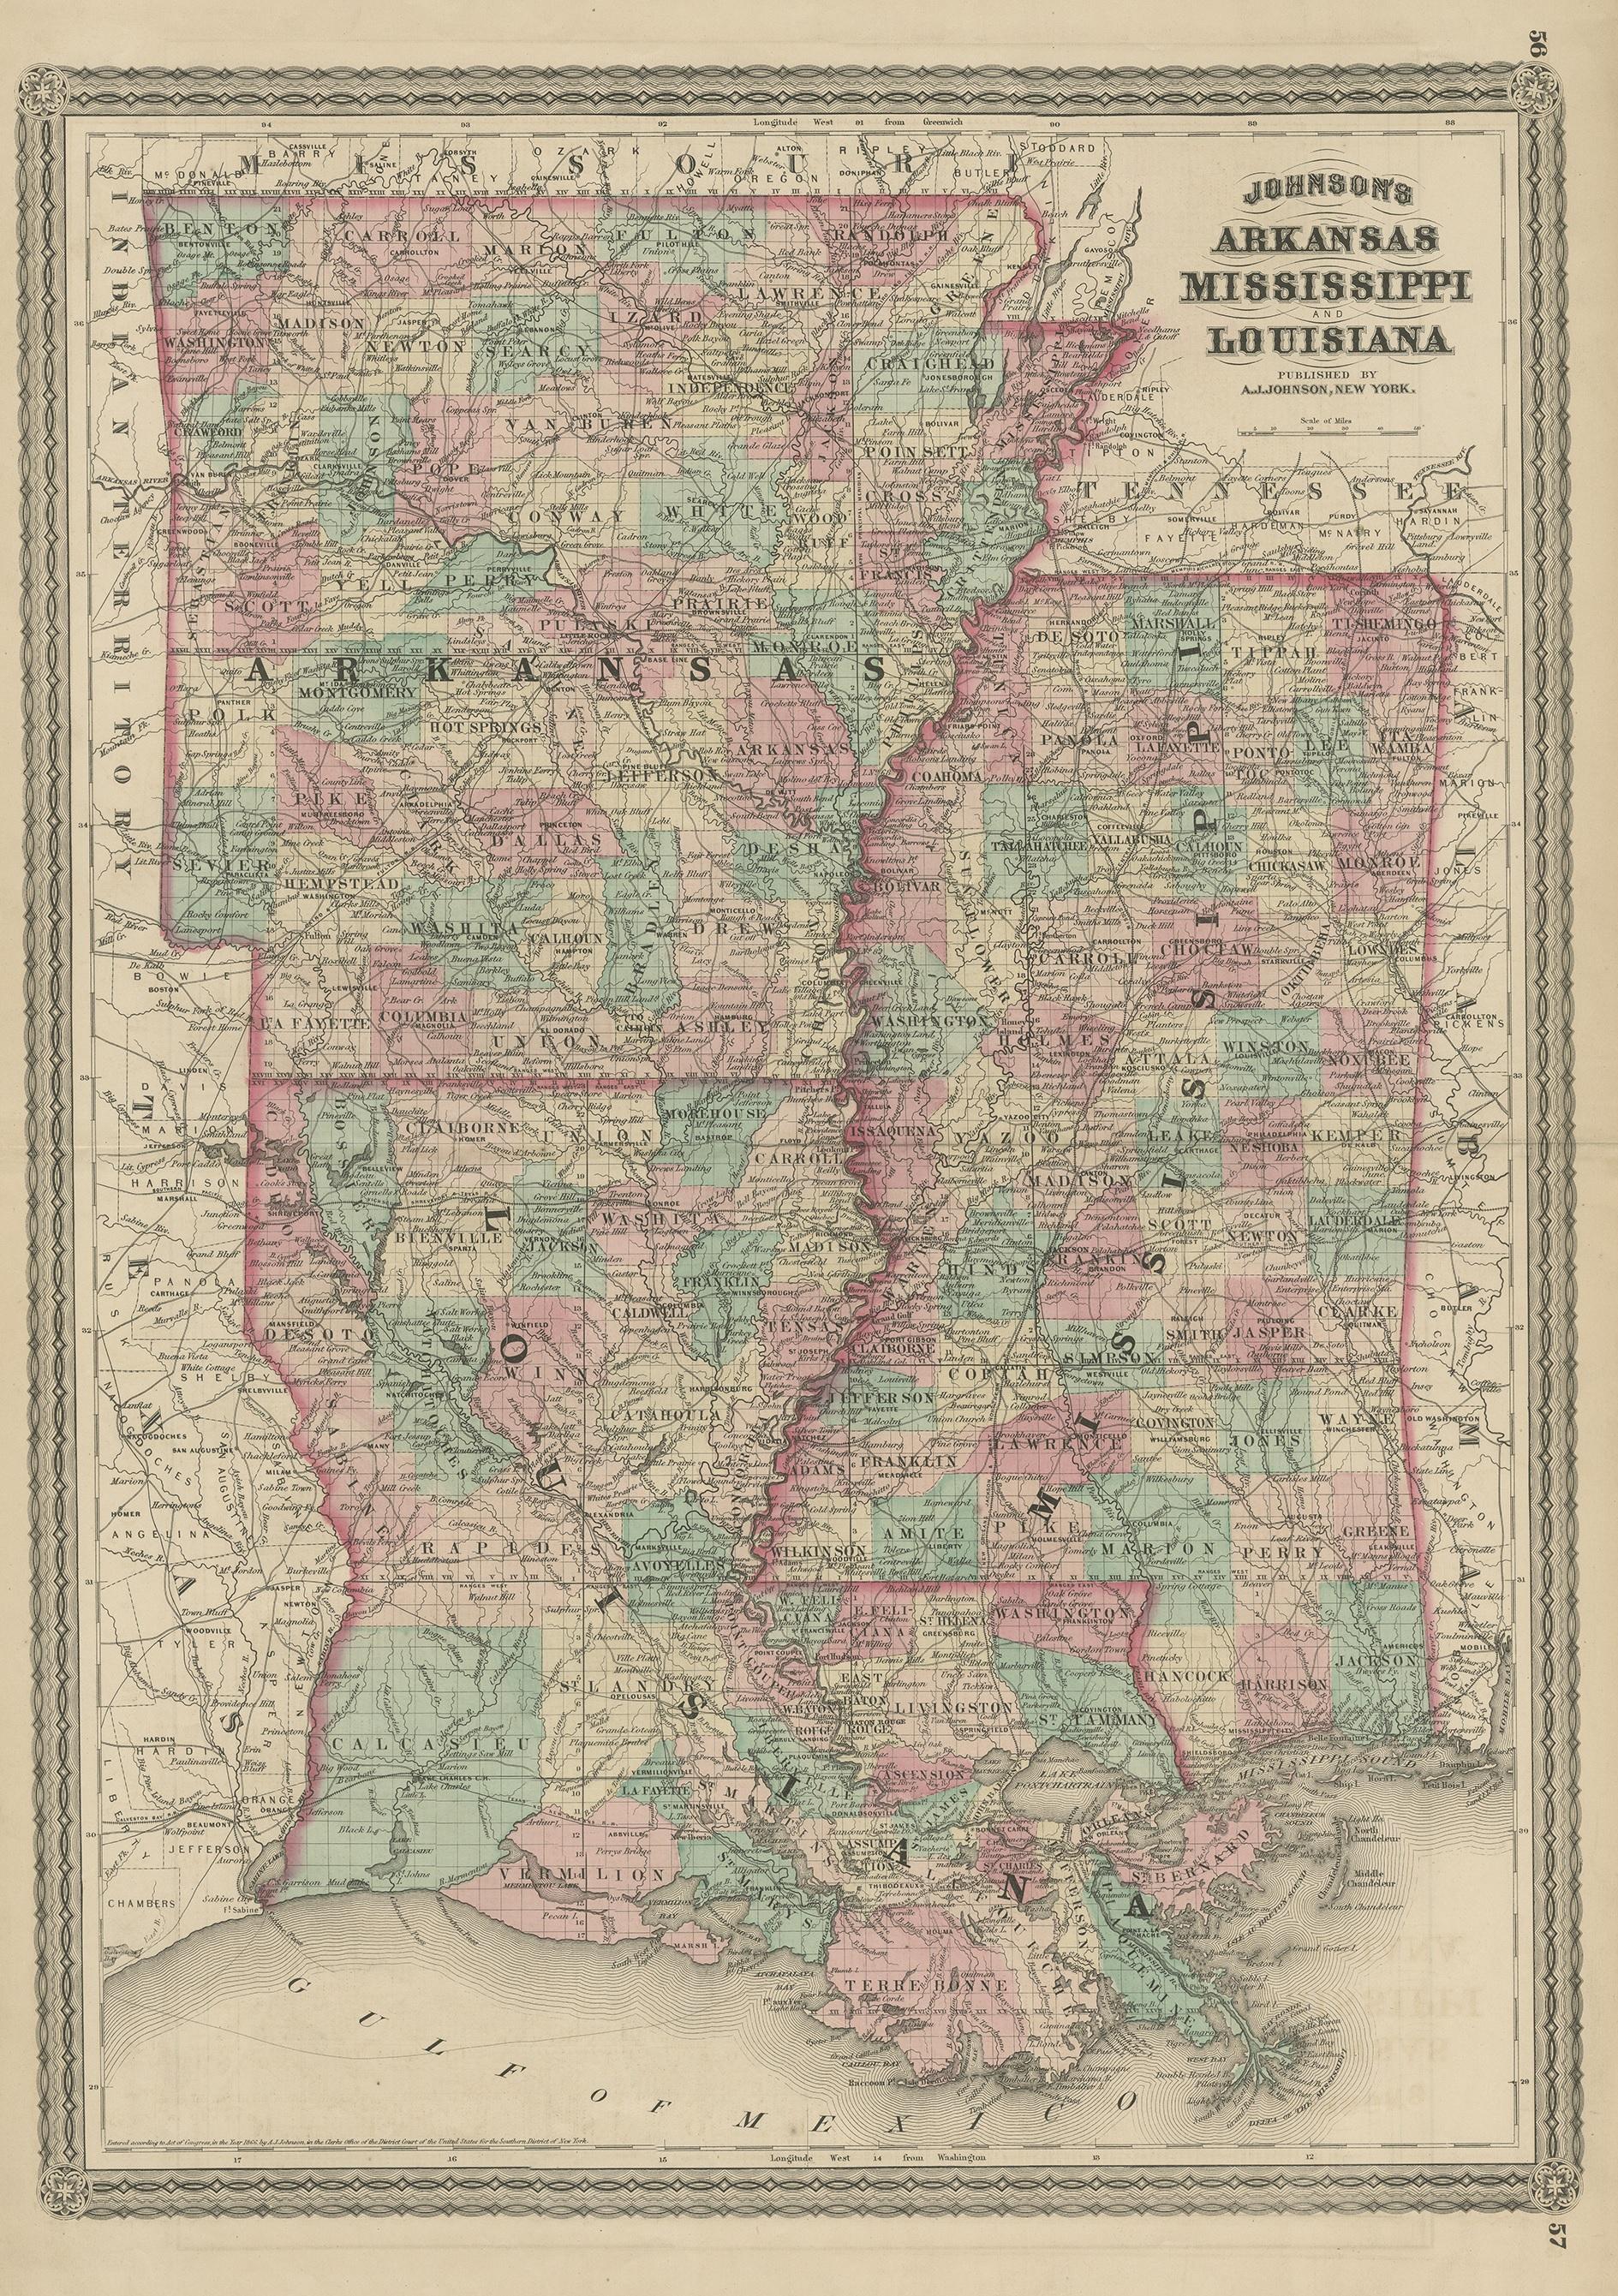 Antique map titled 'Johnson's Arkansas (..)'. Original map of Arkansas, Mississippi and Louisiana. This map originates from 'Johnson's New Illustrated Family Atlas of the World' by A.J. Johnson. Published 1872.